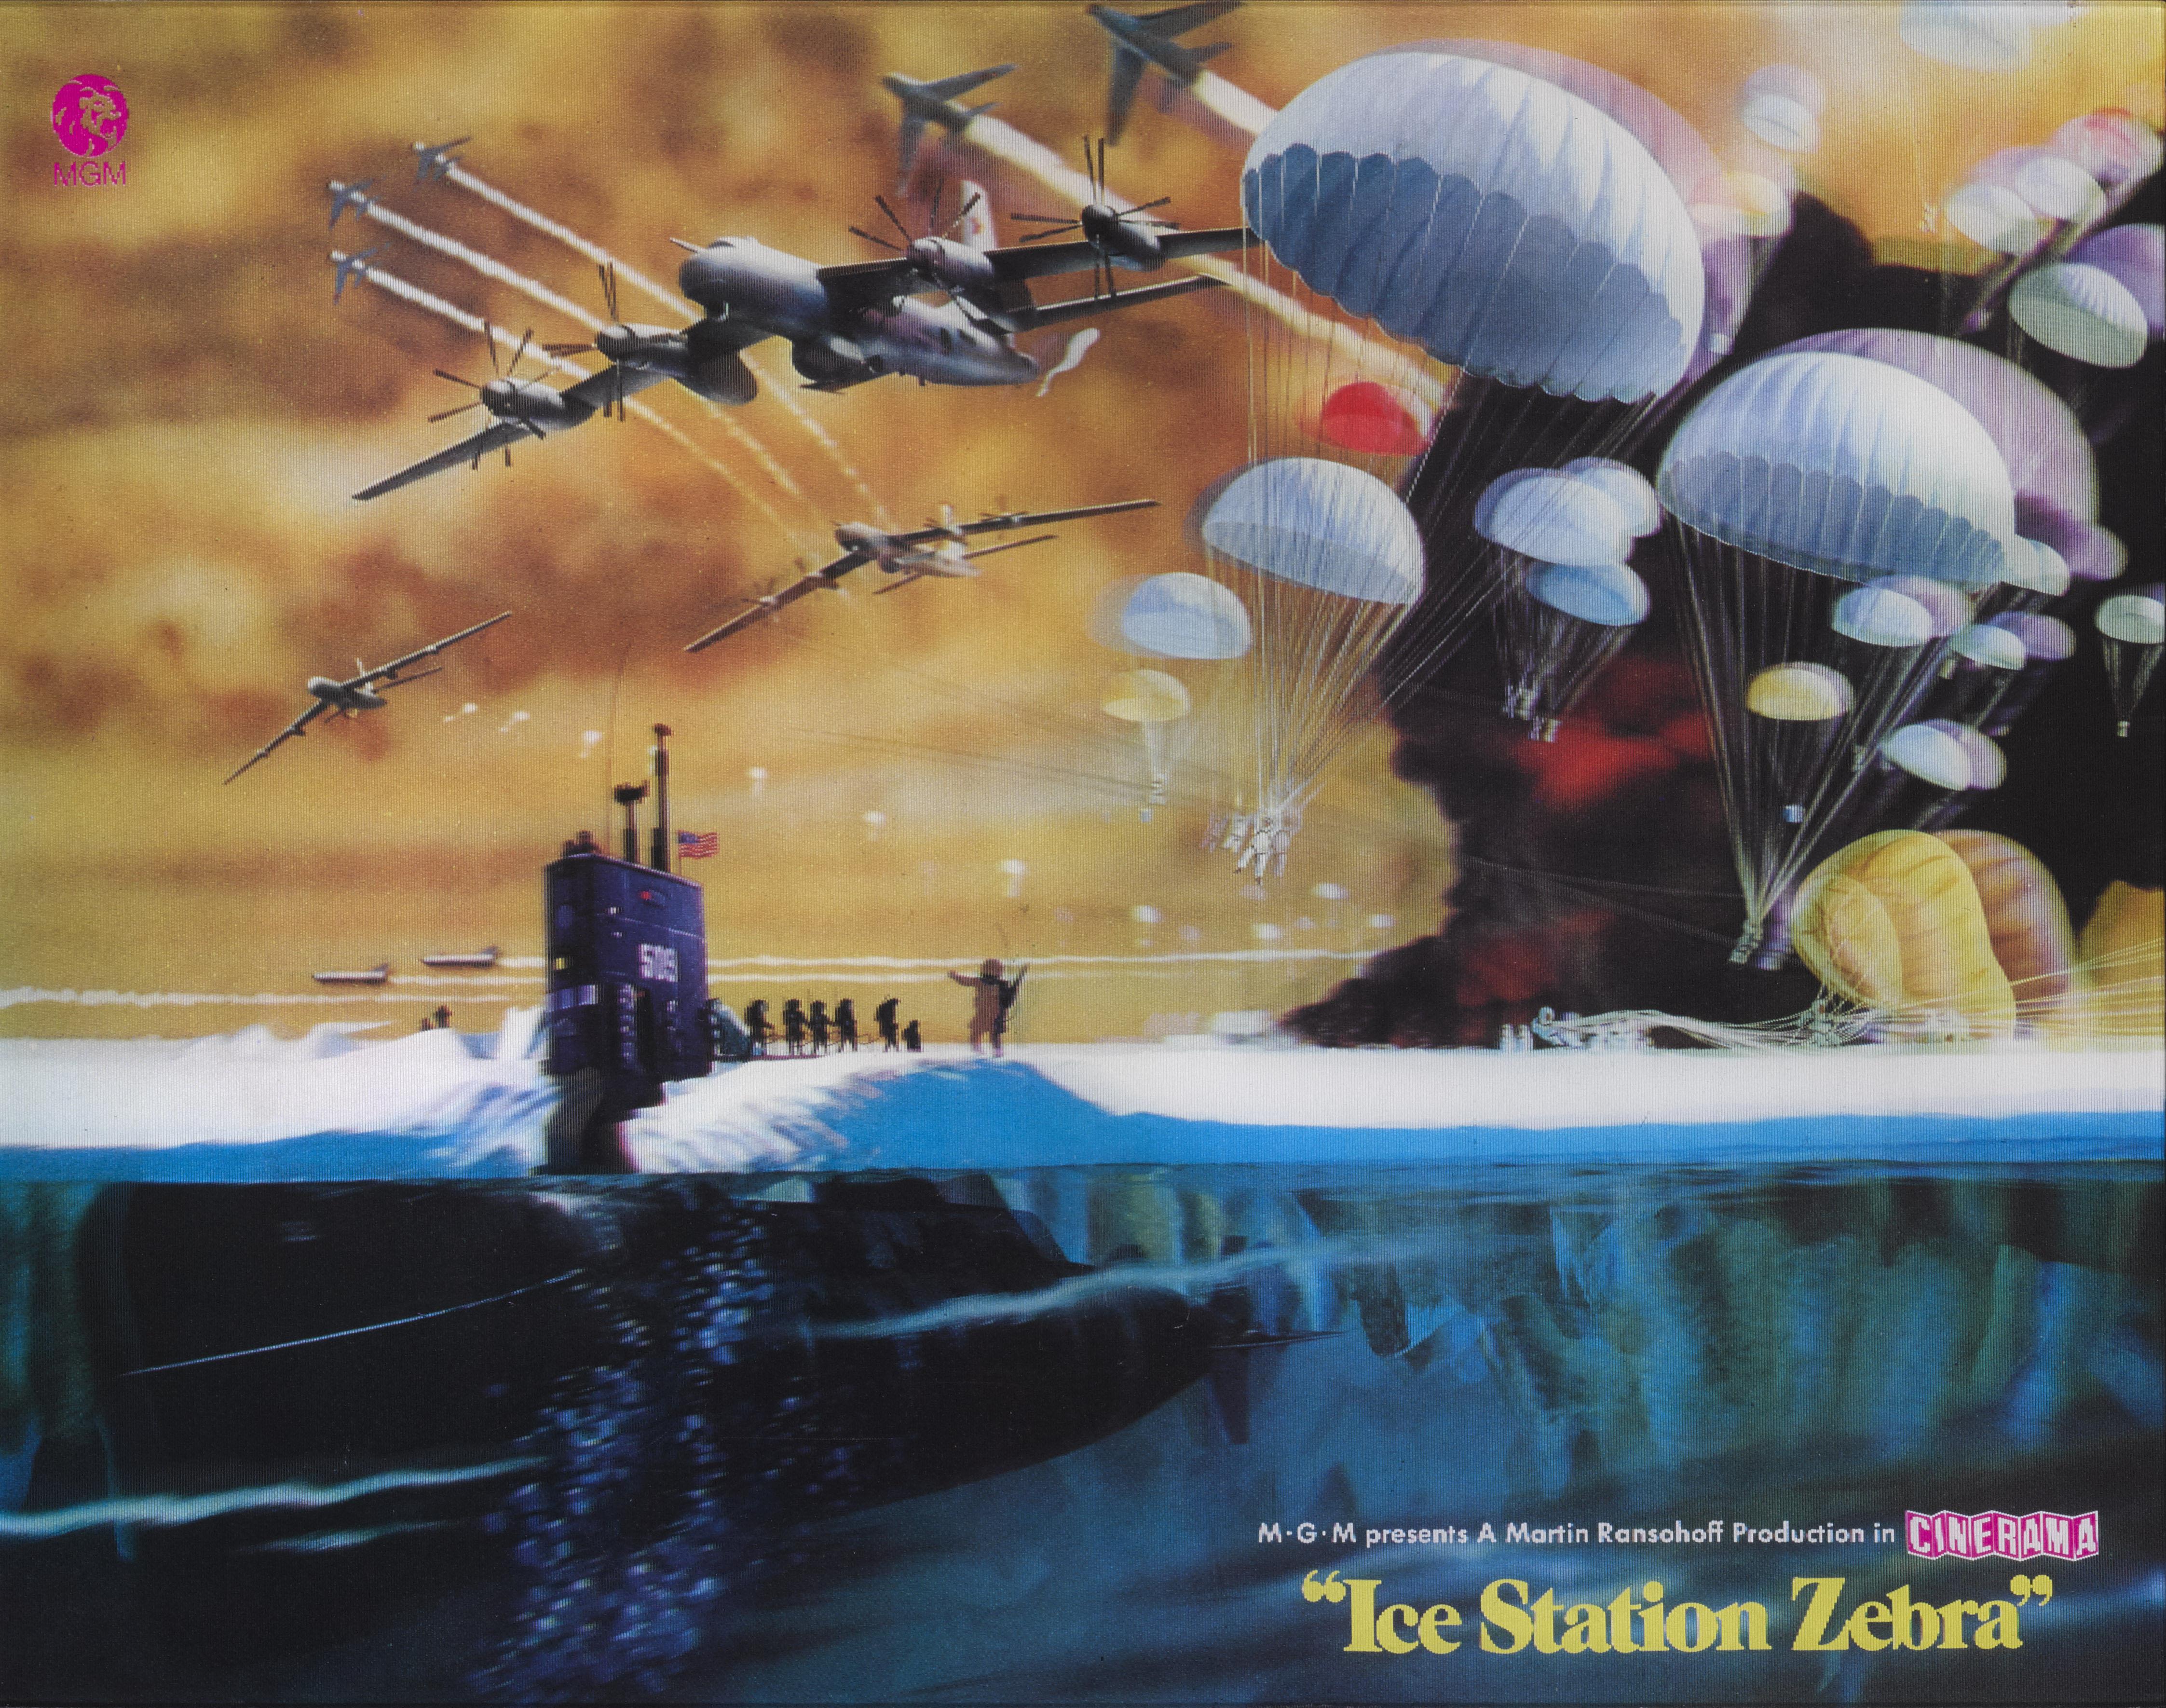 Original US 3D lenticular lobby display for the 1968 film Ice Station Zebra.
This film was directed by John Sturges, and stars Rock Hudson, Patrick McGoohan and Ernest Borgnine. The film parallels real-life events in 1959, where the USN have been